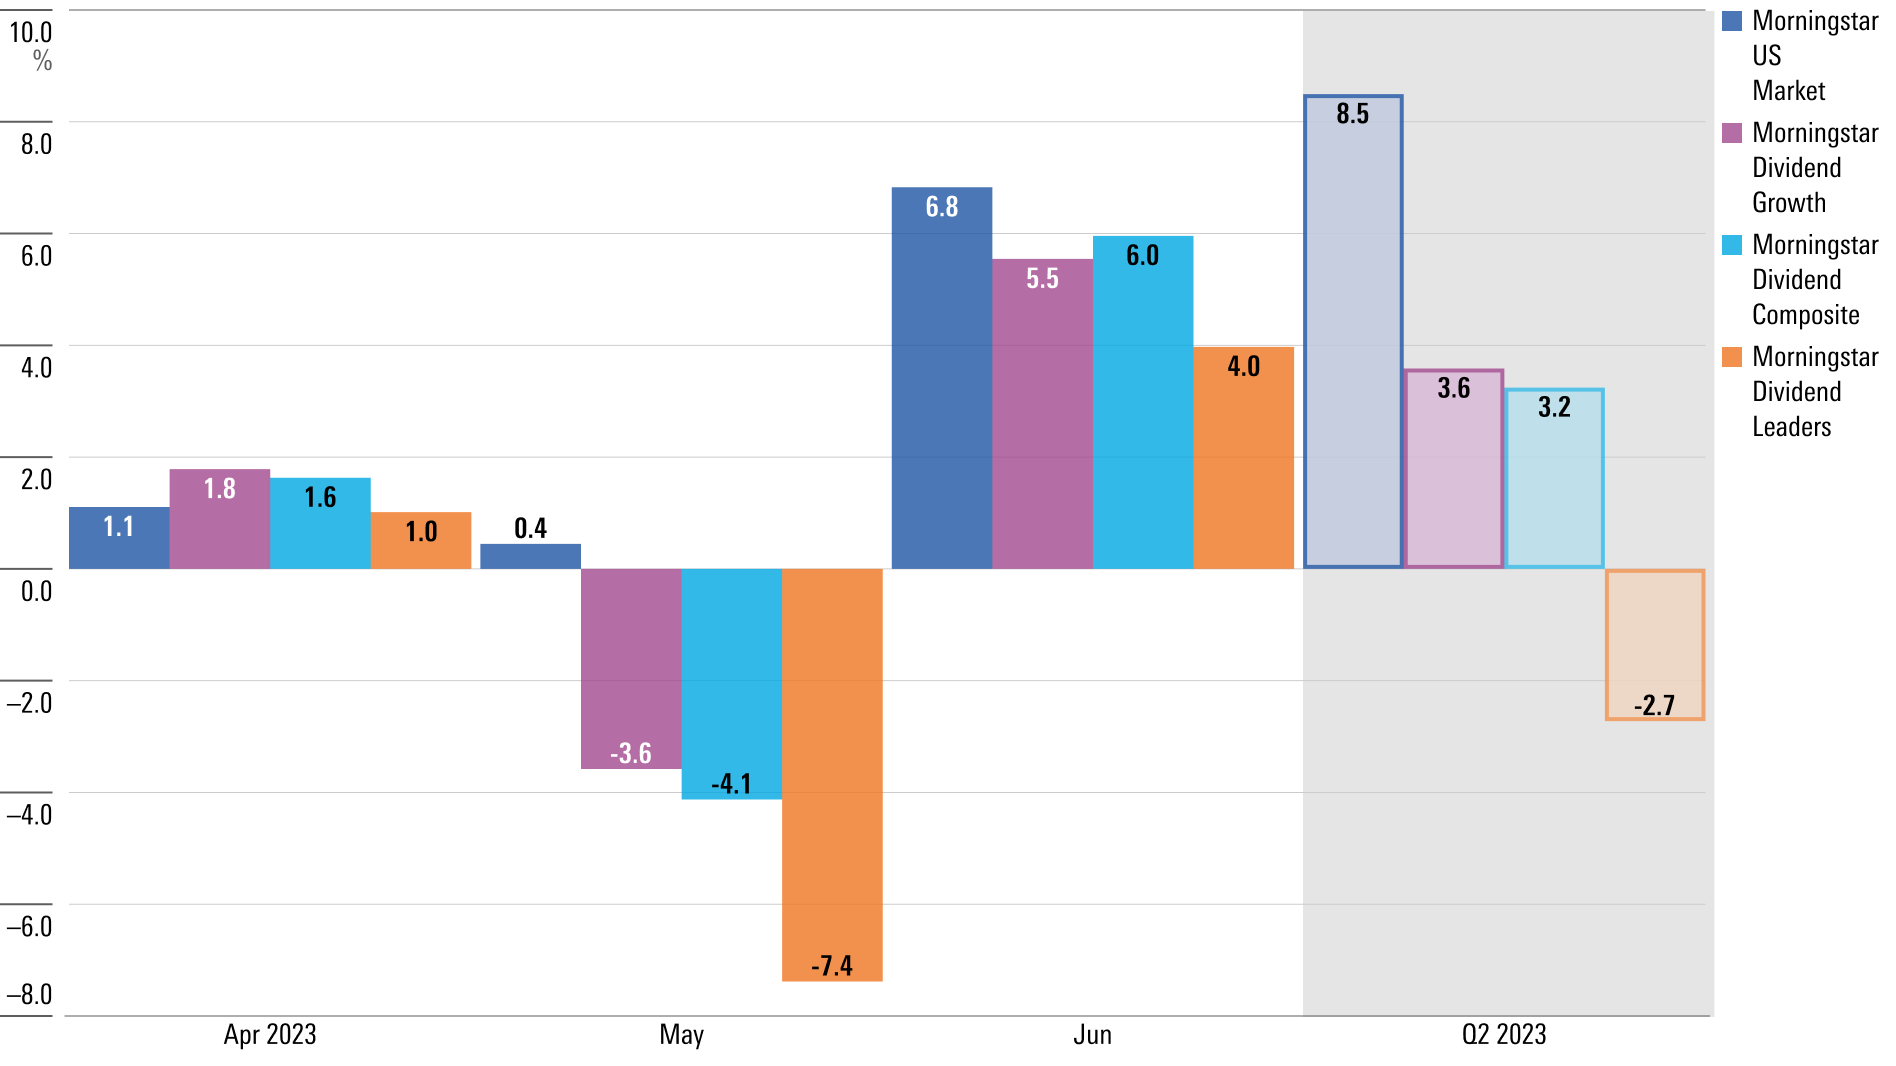 Bar chart showing the performance of key Morningstar dividend indexes during the second quarter of 2023.